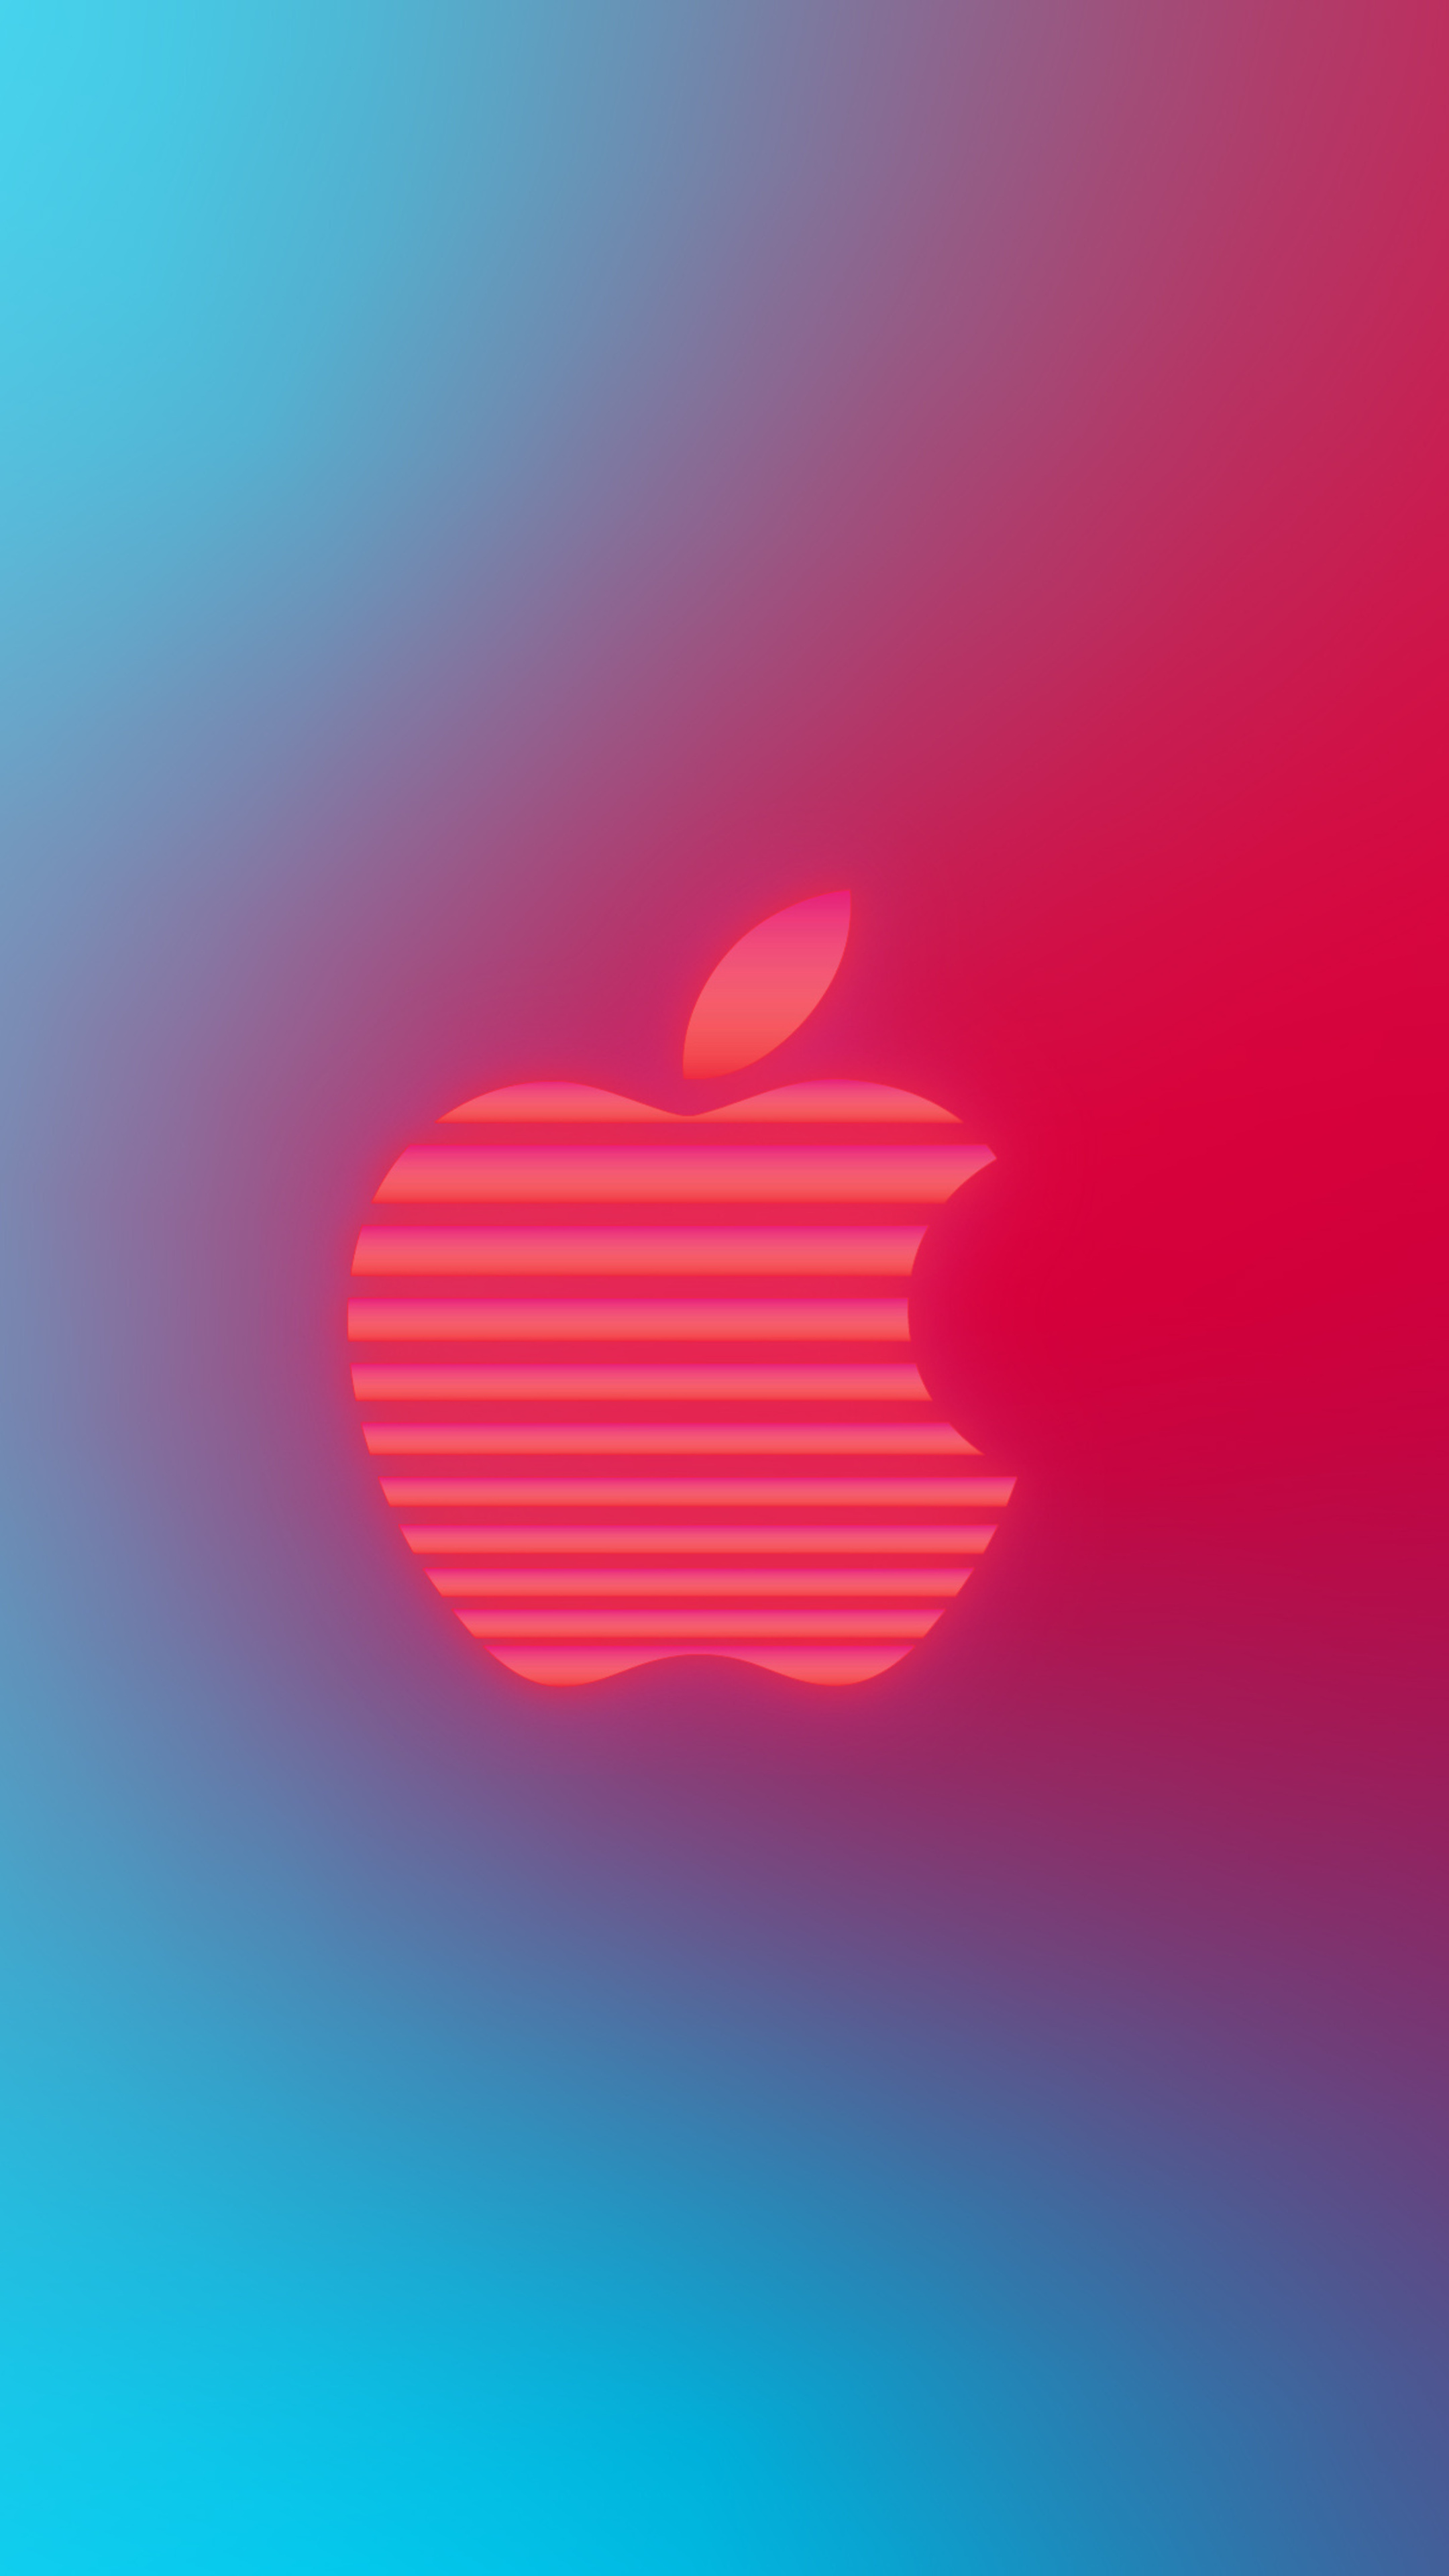 iMac Logo, Apple brand wallpapers, Abstract and colorful, Stylish and modern, 2160x3840 4K Phone